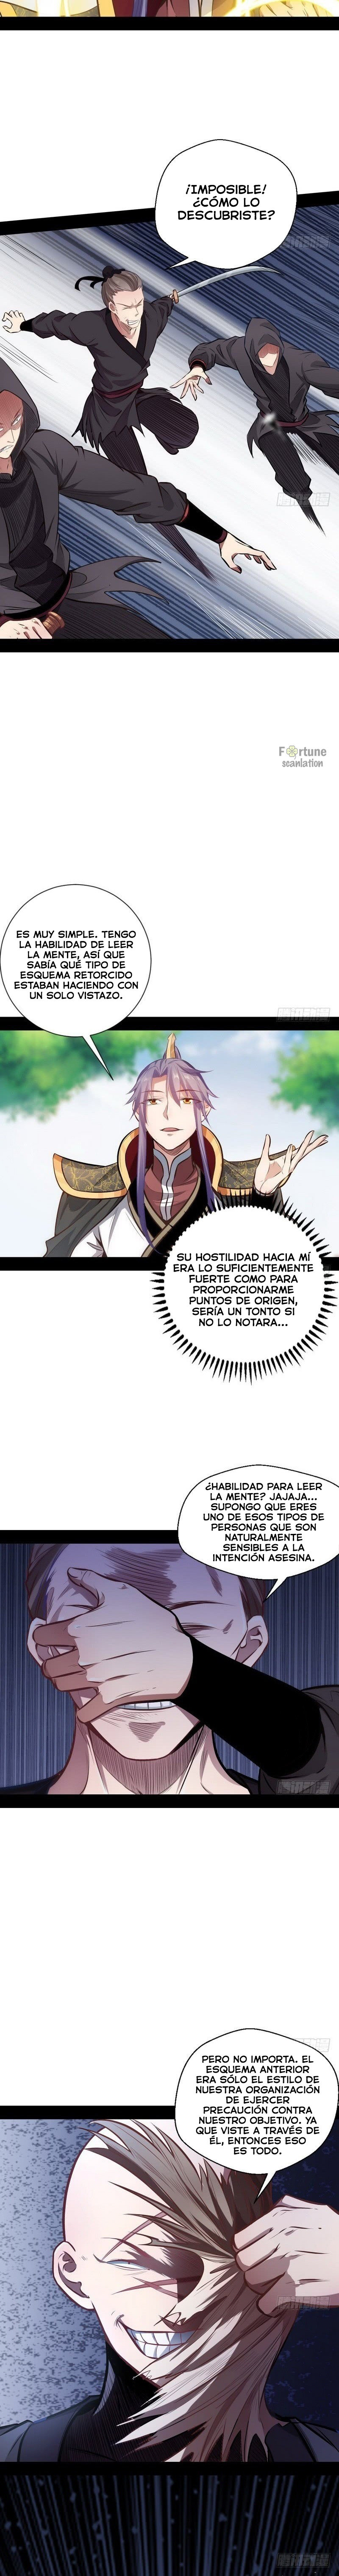 Manga Soy un dios maligno Chapter 31 image number 1